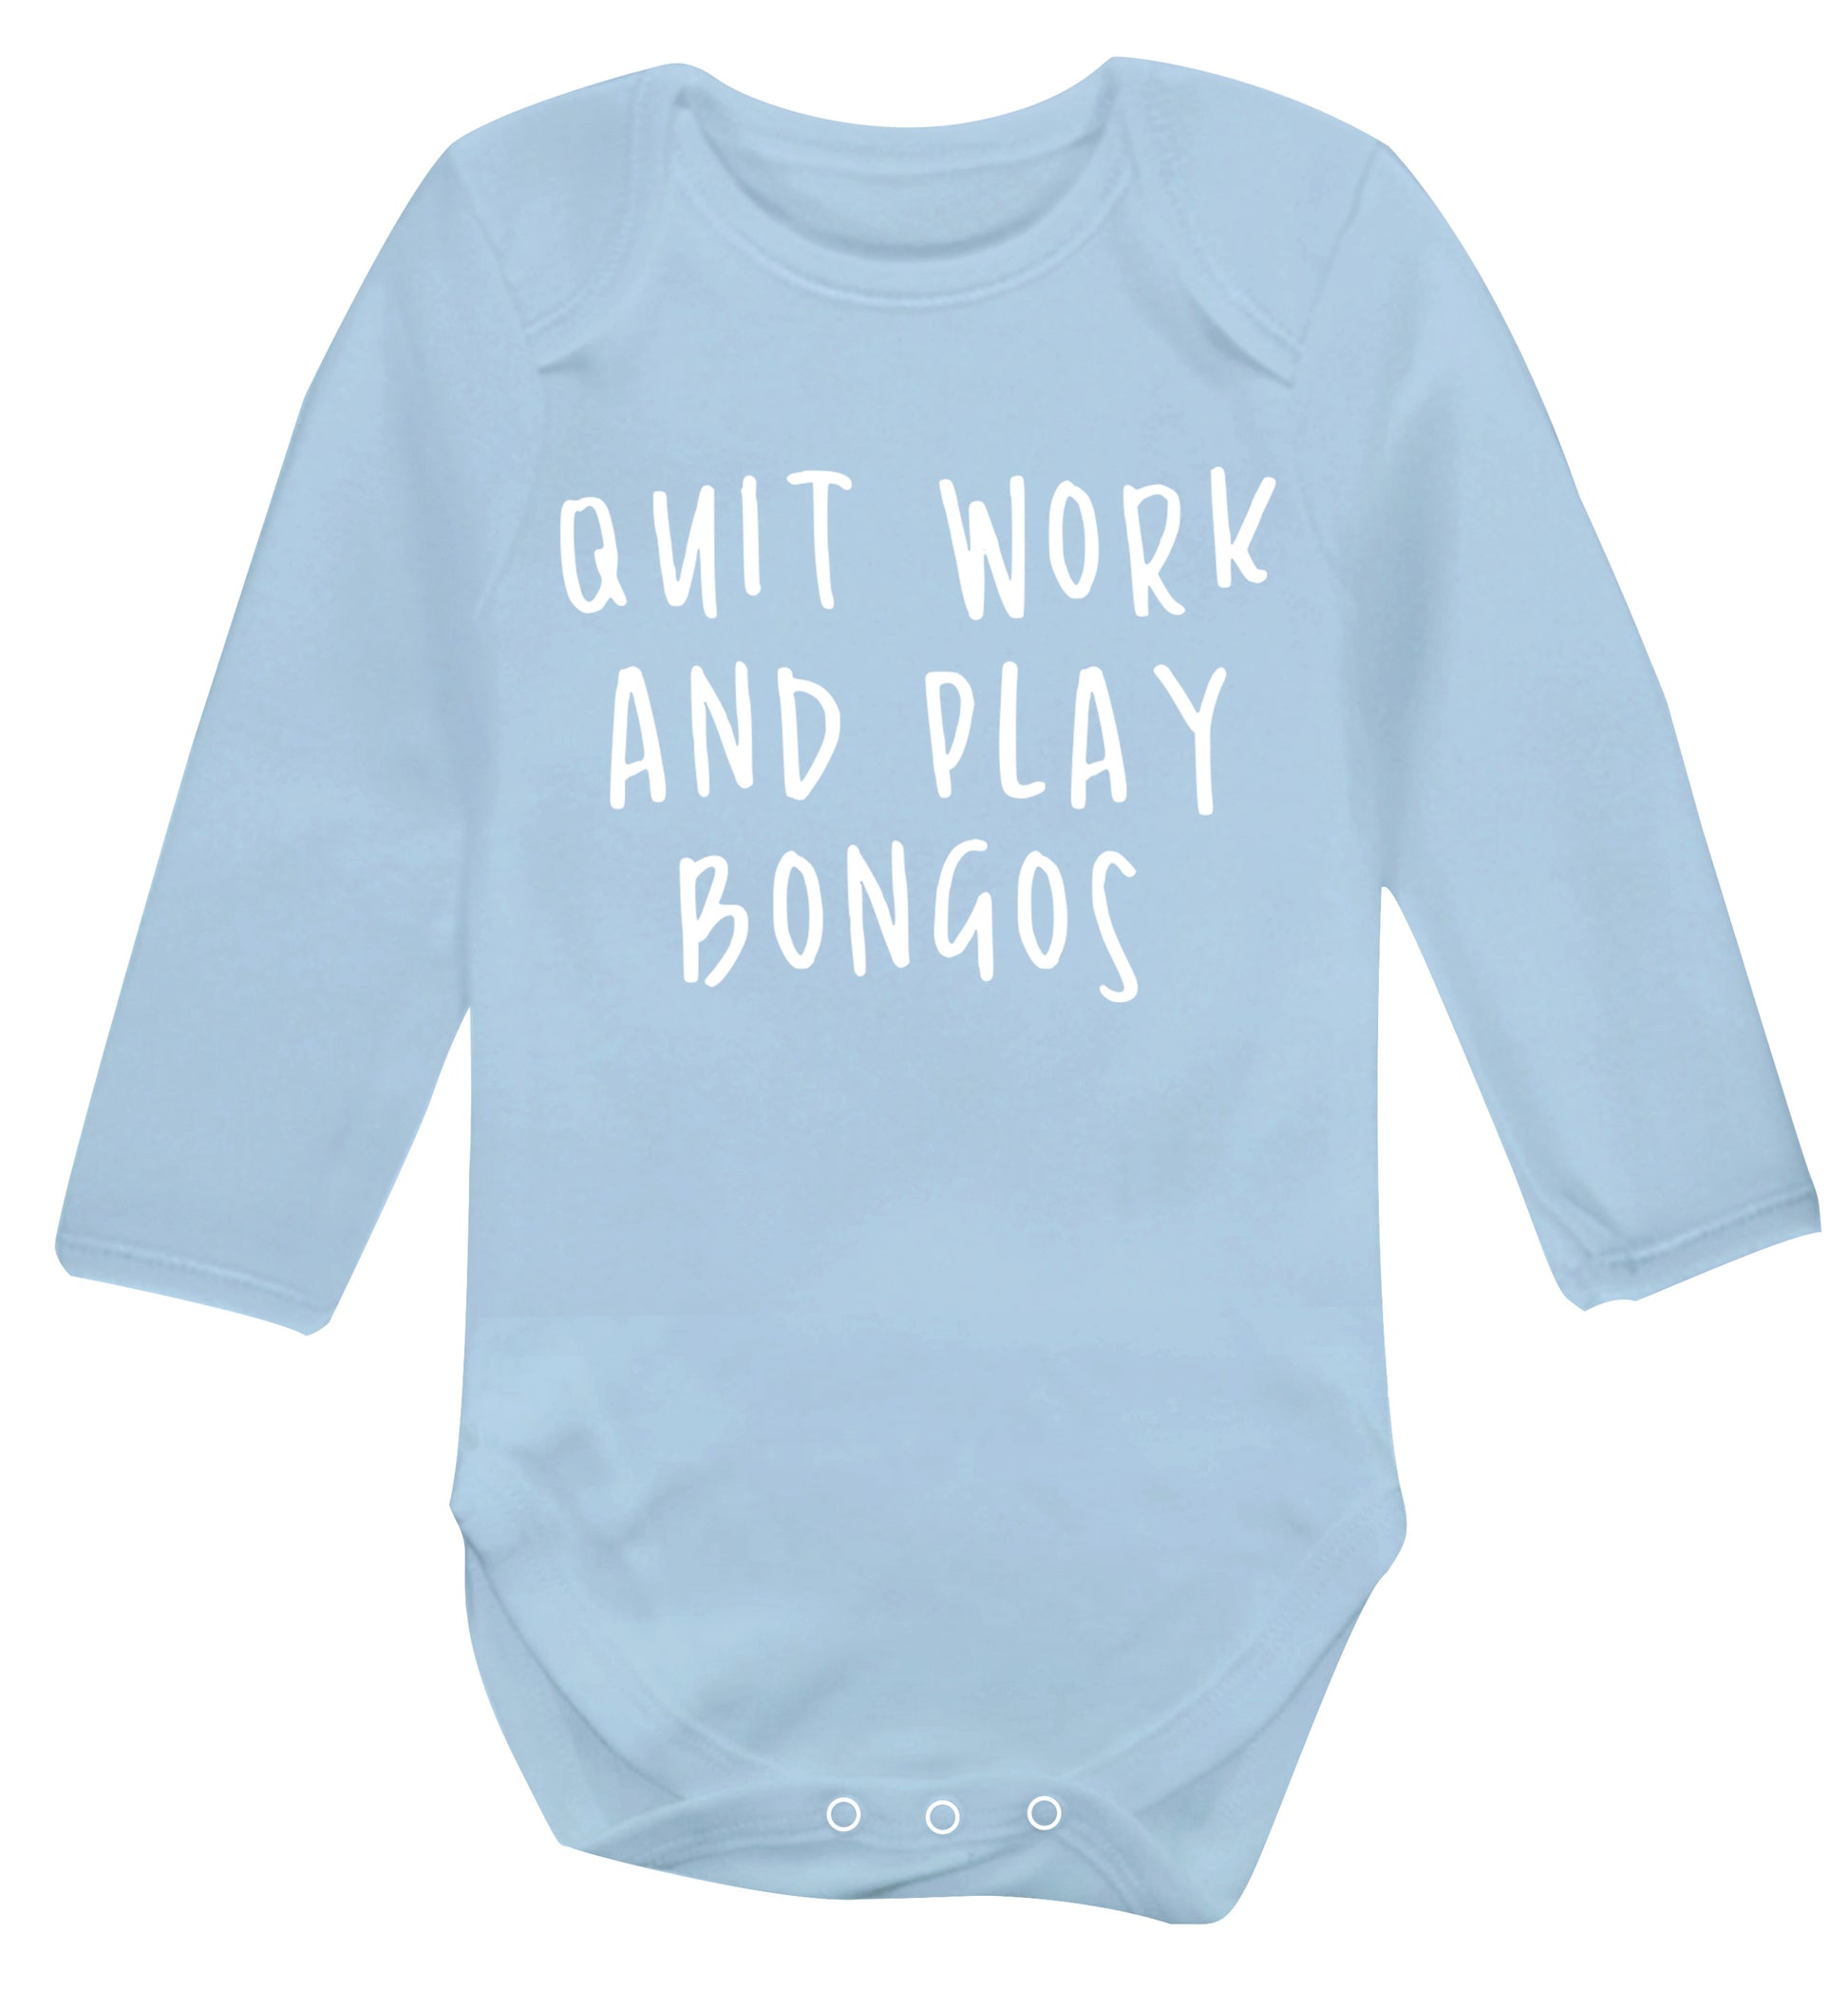 Quit work and play bongos Baby Vest long sleeved pale blue 6-12 months